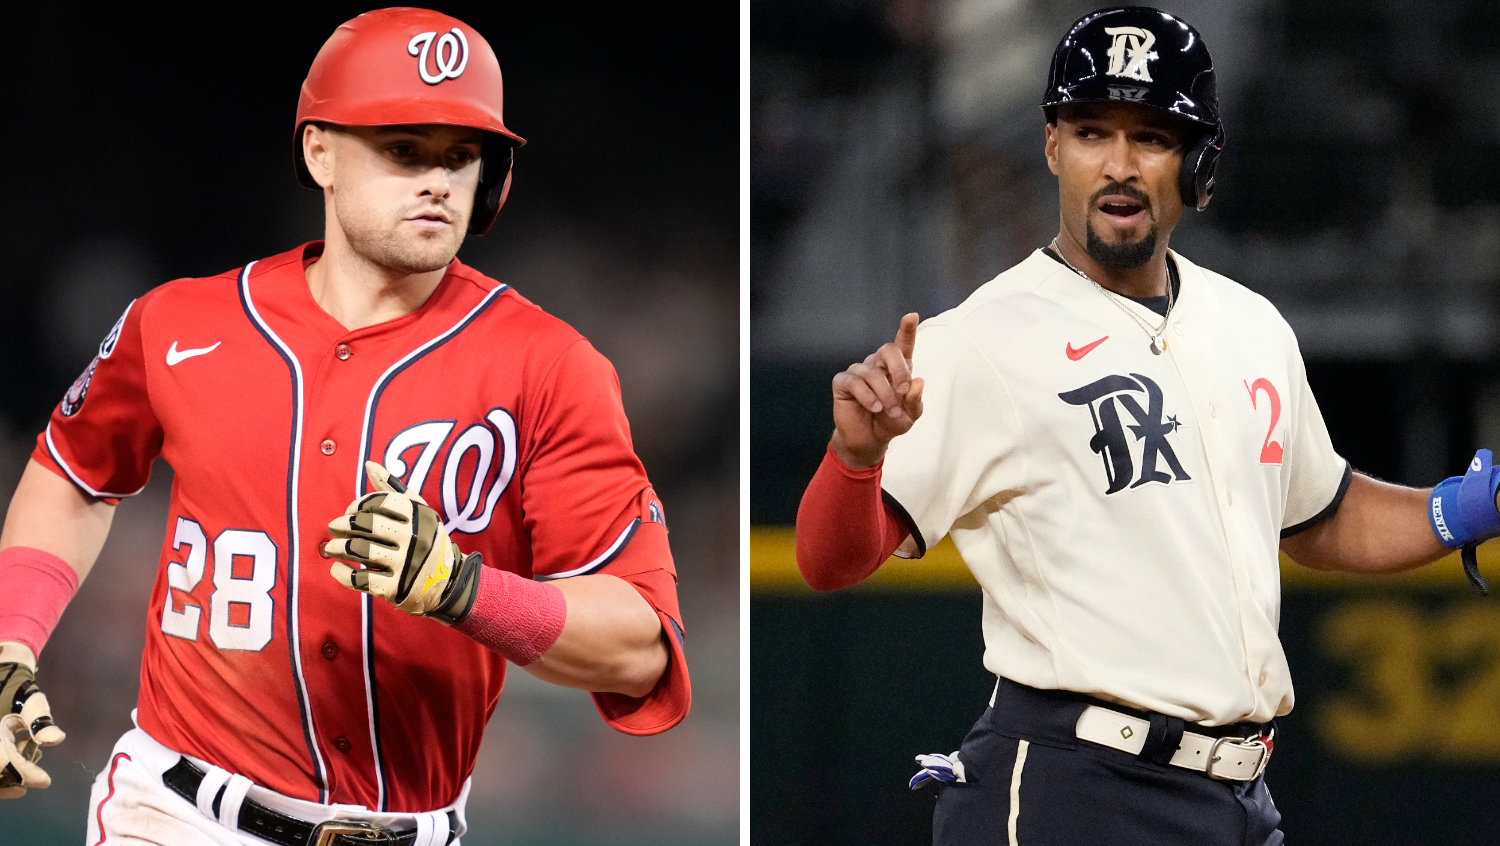 How to Watch the Nationals vs. Dodgers Game: Streaming & TV Info